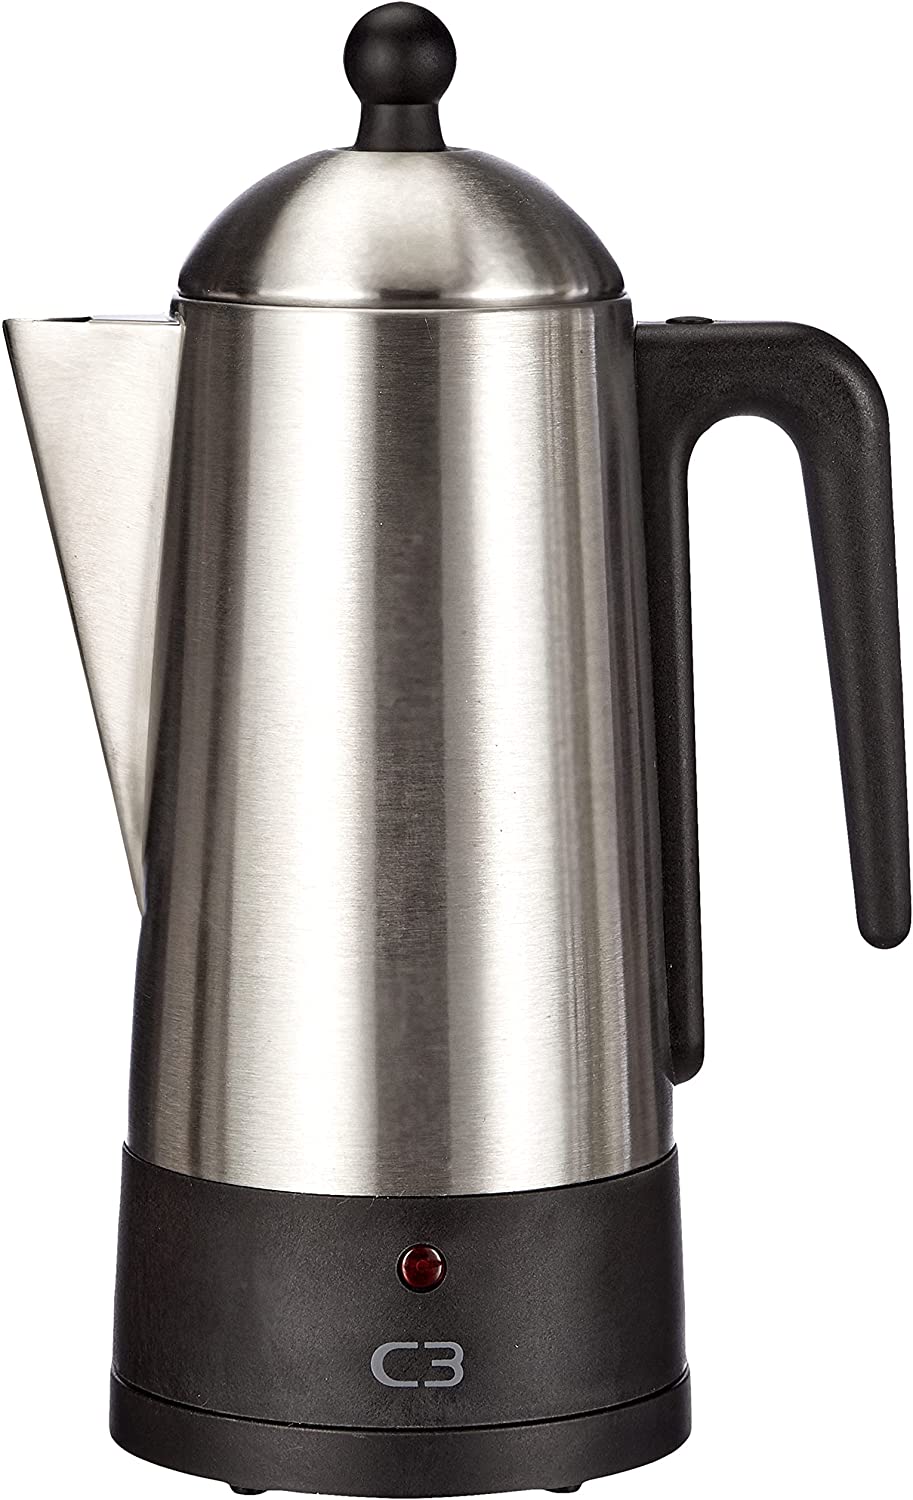 C3 30-32000 Percolator, Stainless Steel, Silver